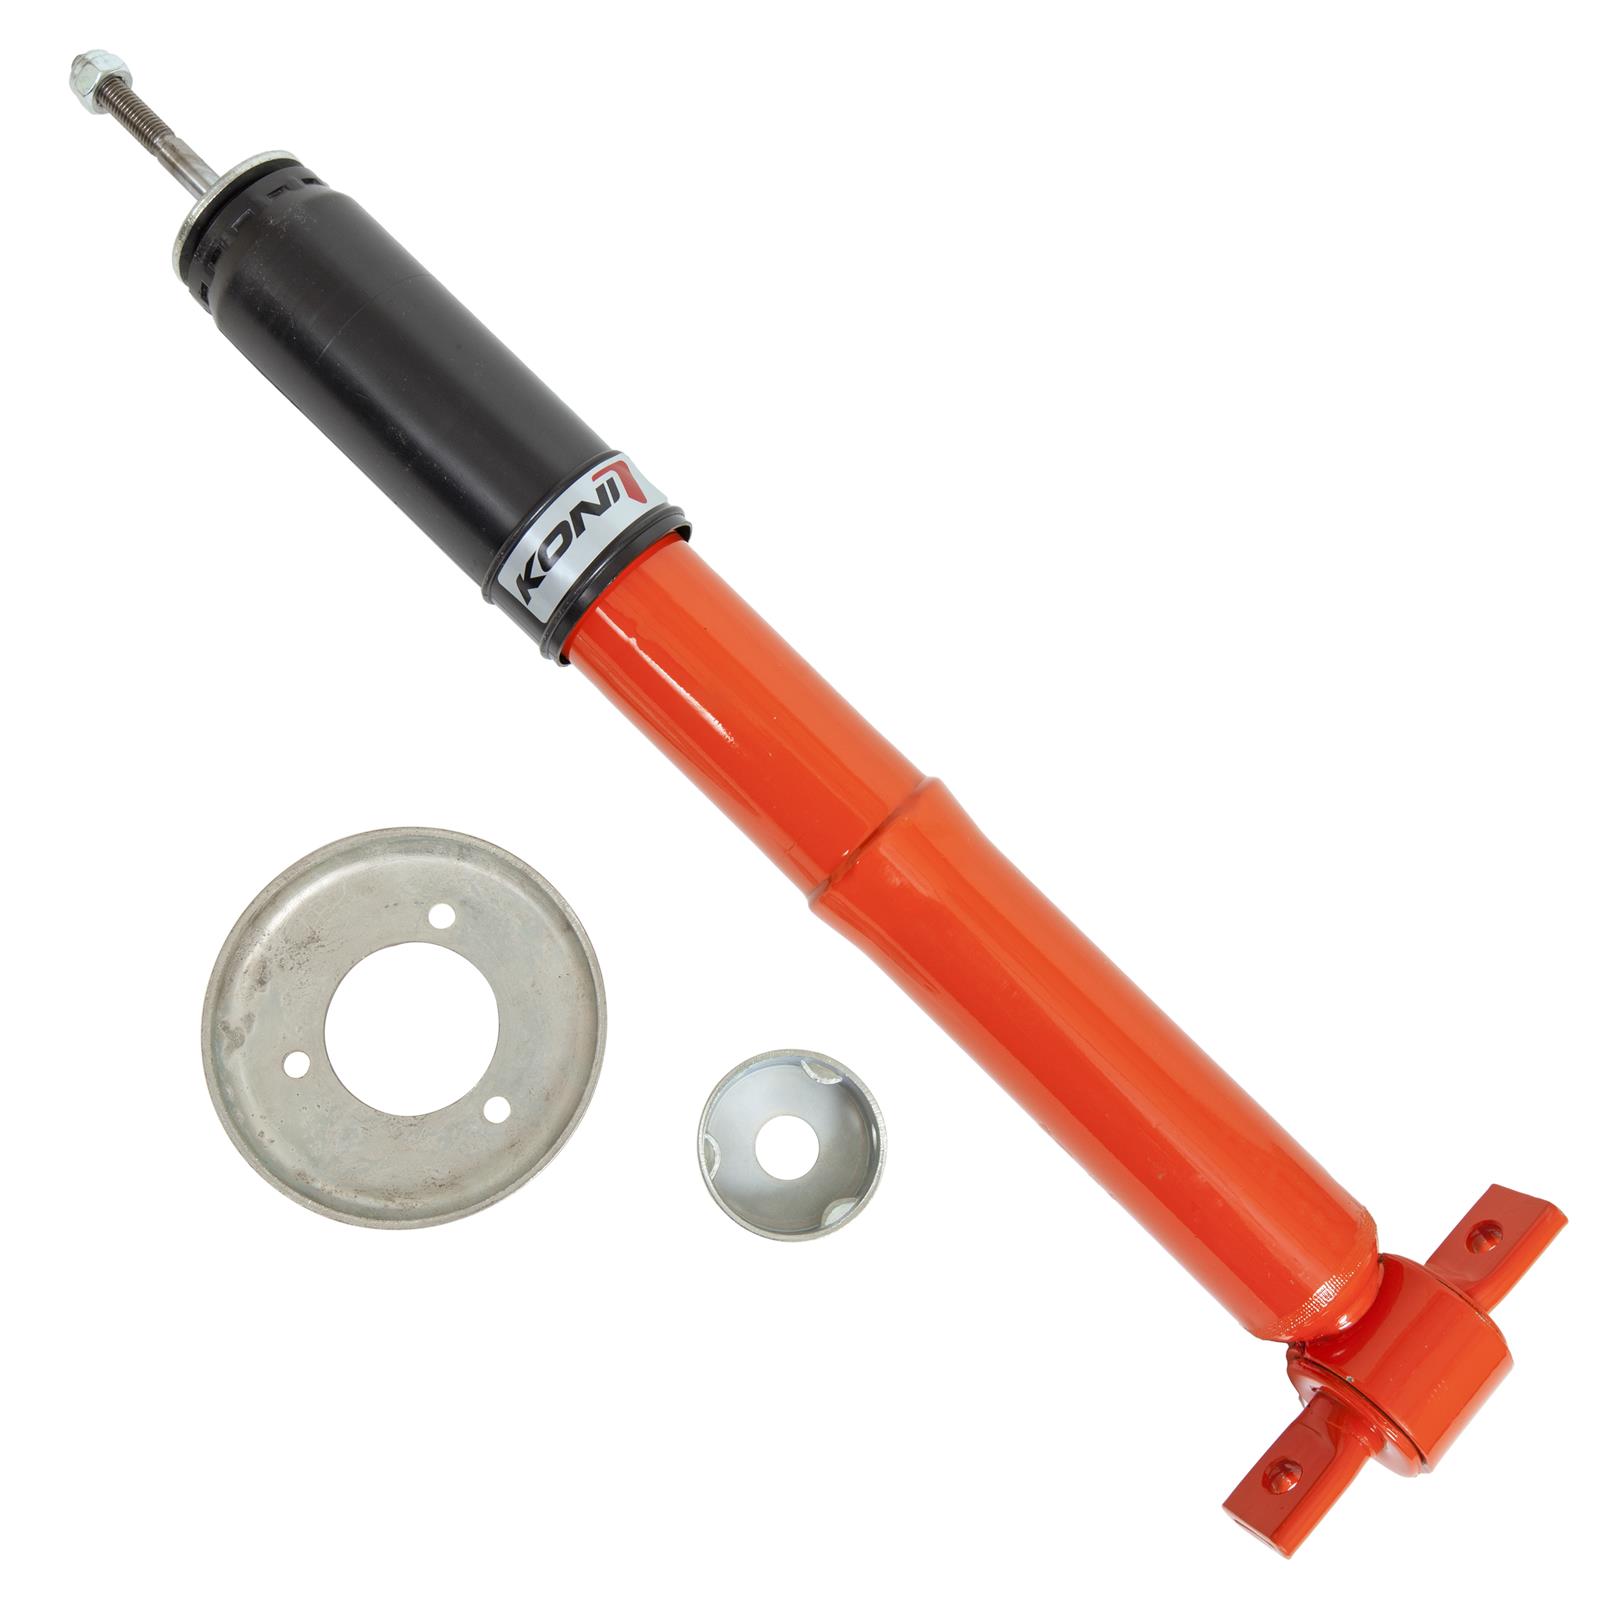 Koni 8250 1008 Shock Absorber For 2005-2014 Ford Mustang NEW